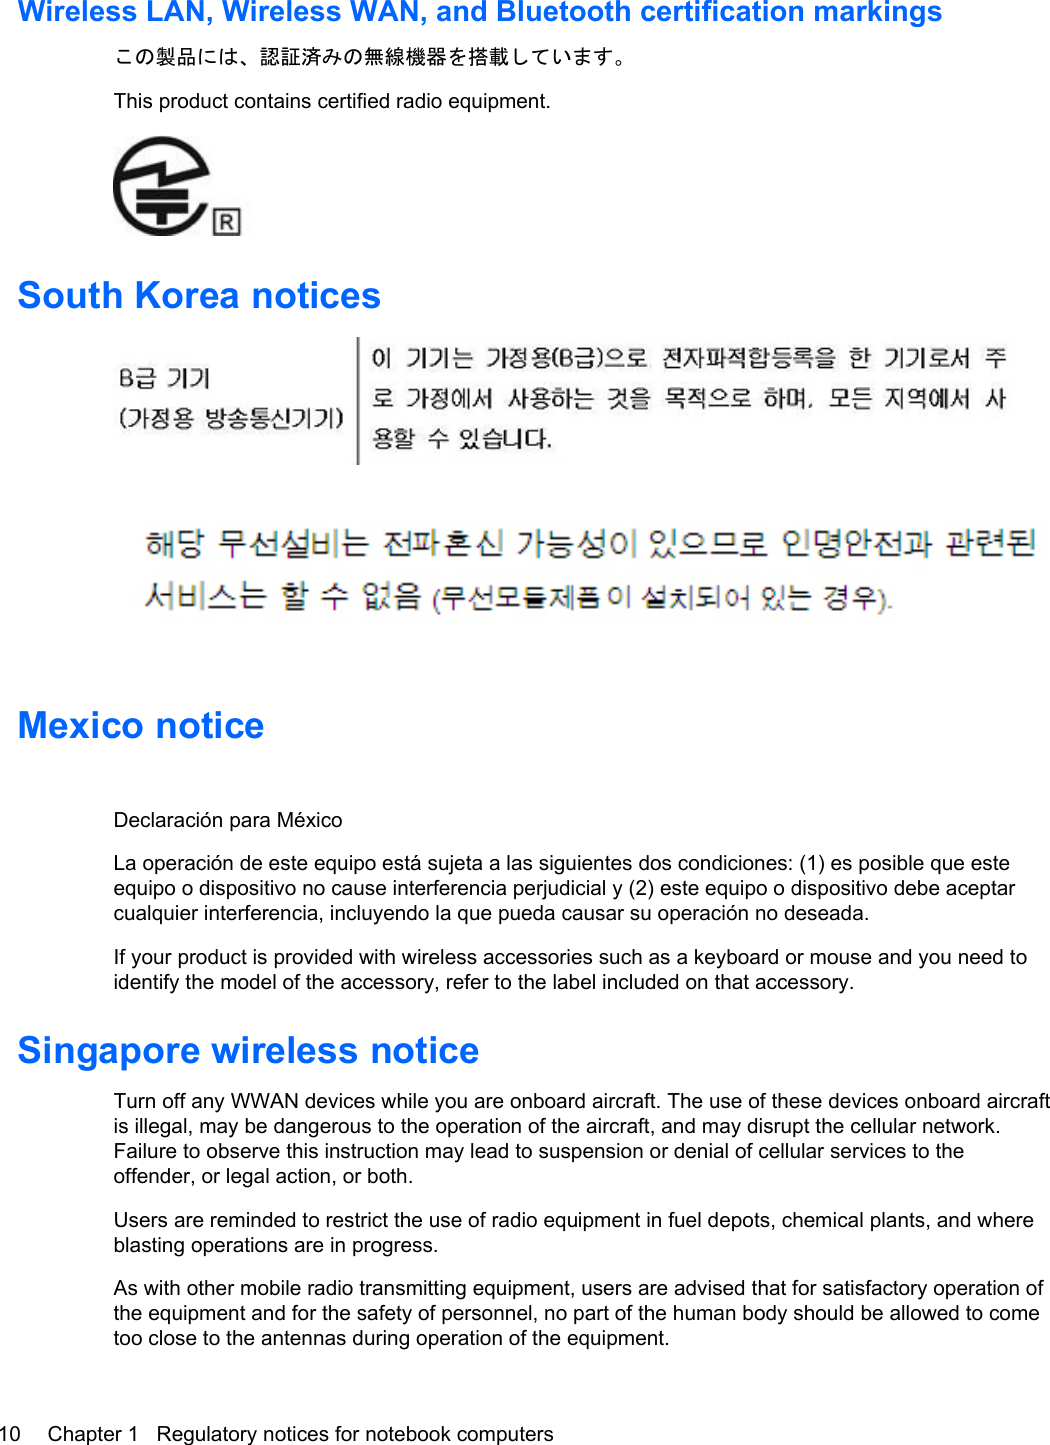 Wireless LAN, Wireless WAN, and Bluetooth certification markingsこの製品には、認証済みの無線機器を搭載しています。This product contains certified radio equipment.South Korea noticesMexico noticeDeclaración para MéxicoLa operación de este equipo está sujeta a las siguientes dos condiciones: (1) es posible que esteequipo o dispositivo no cause interferencia perjudicial y (2) este equipo o dispositivo debe aceptarcualquier interferencia, incluyendo la que pueda causar su operación no deseada.If your product is provided with wireless accessories such as a keyboard or mouse and you need toidentify the model of the accessory, refer to the label included on that accessory.Singapore wireless noticeTurn off any WWAN devices while you are onboard aircraft. The use of these devices onboard aircraftis illegal, may be dangerous to the operation of the aircraft, and may disrupt the cellular network.Failure to observe this instruction may lead to suspension or denial of cellular services to theoffender, or legal action, or both.Users are reminded to restrict the use of radio equipment in fuel depots, chemical plants, and whereblasting operations are in progress.As with other mobile radio transmitting equipment, users are advised that for satisfactory operation ofthe equipment and for the safety of personnel, no part of the human body should be allowed to cometoo close to the antennas during operation of the equipment.10 Chapter 1   Regulatory notices for notebook computers